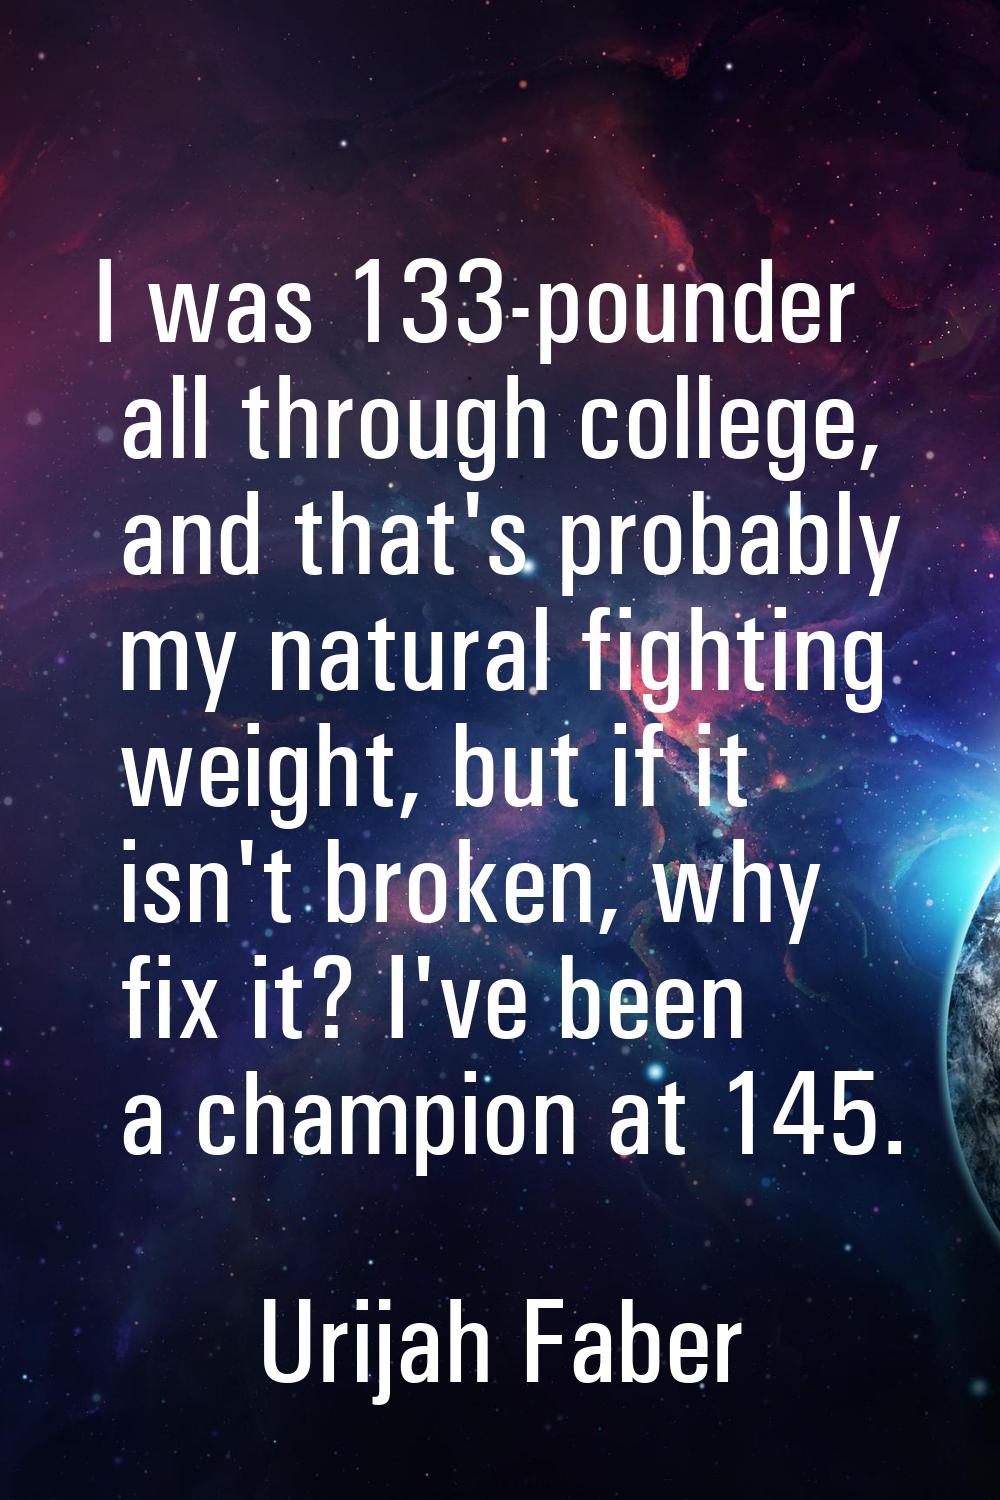 I was 133-pounder all through college, and that's probably my natural fighting weight, but if it is